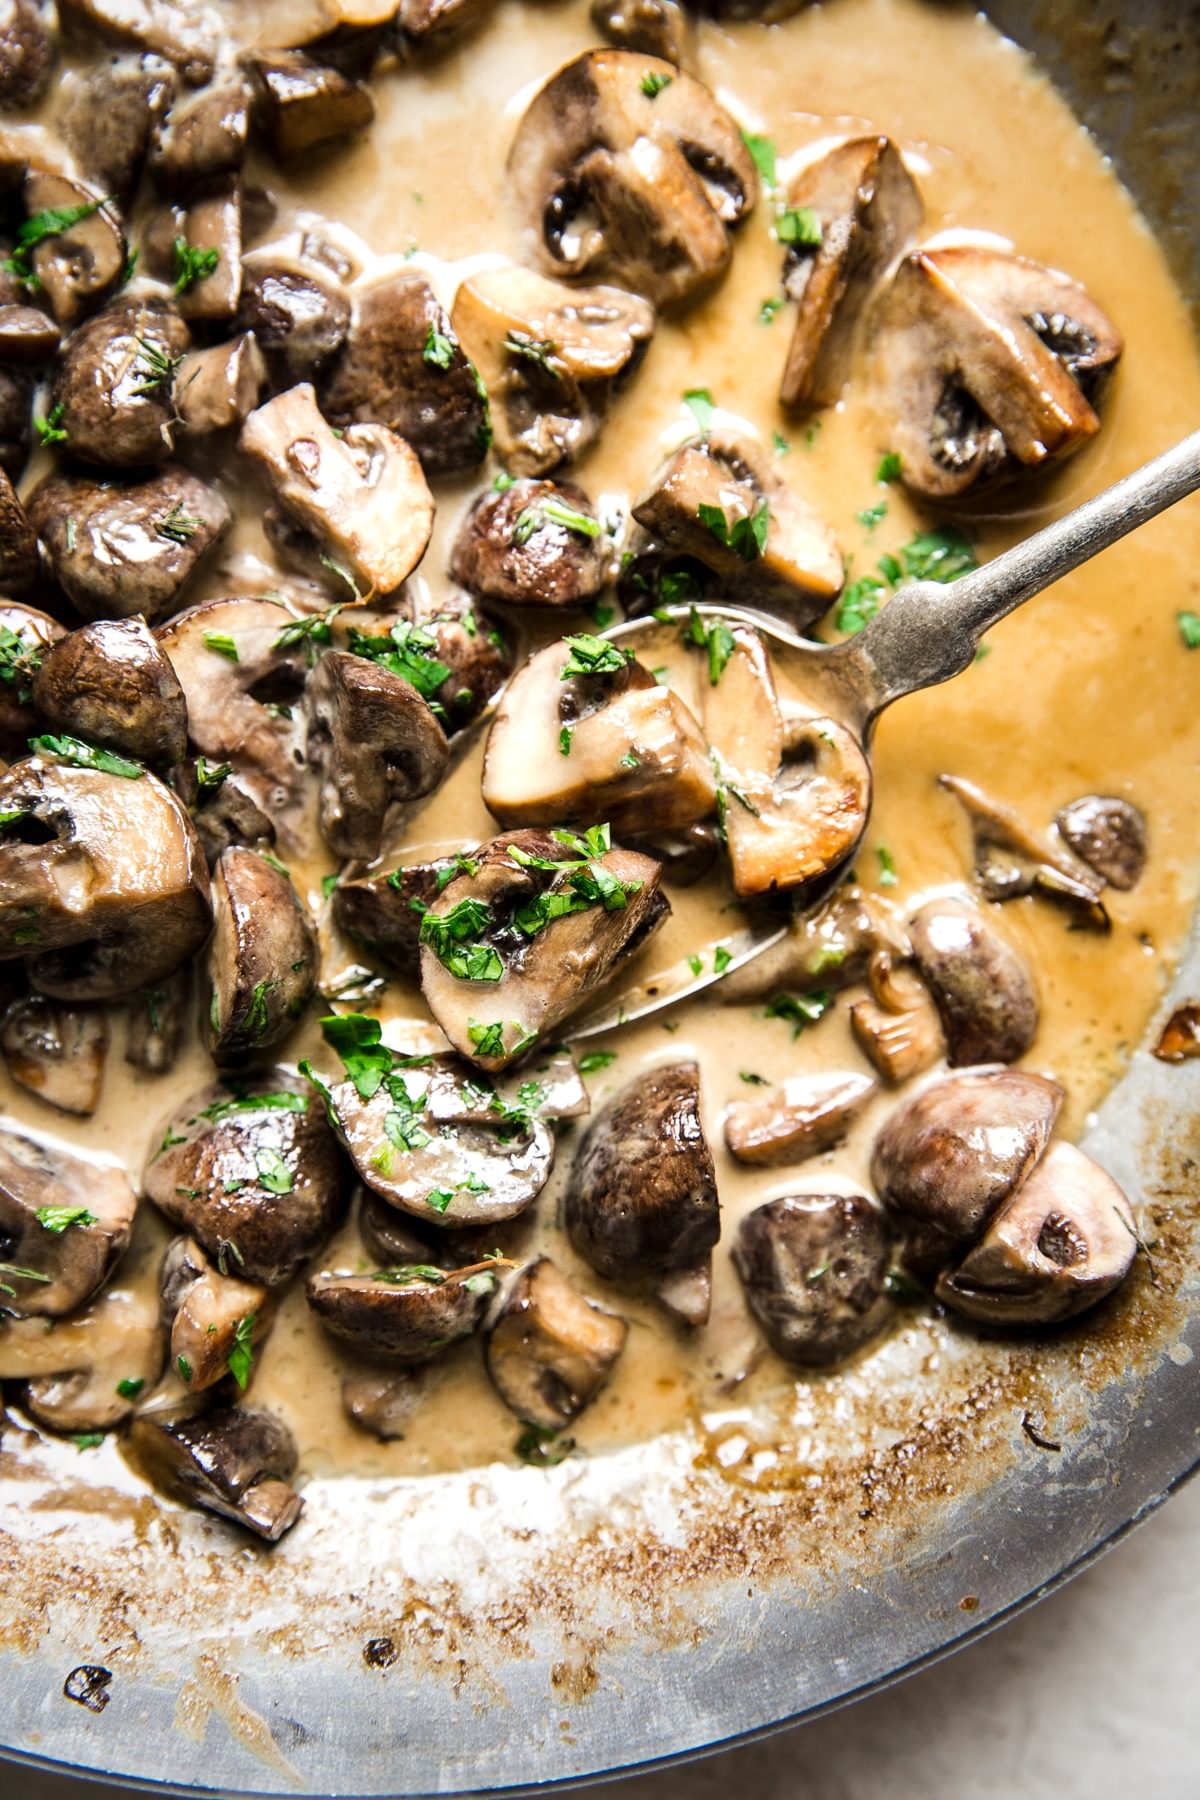 Creamy mushroom sauce made with thyme in a pan with a spoon